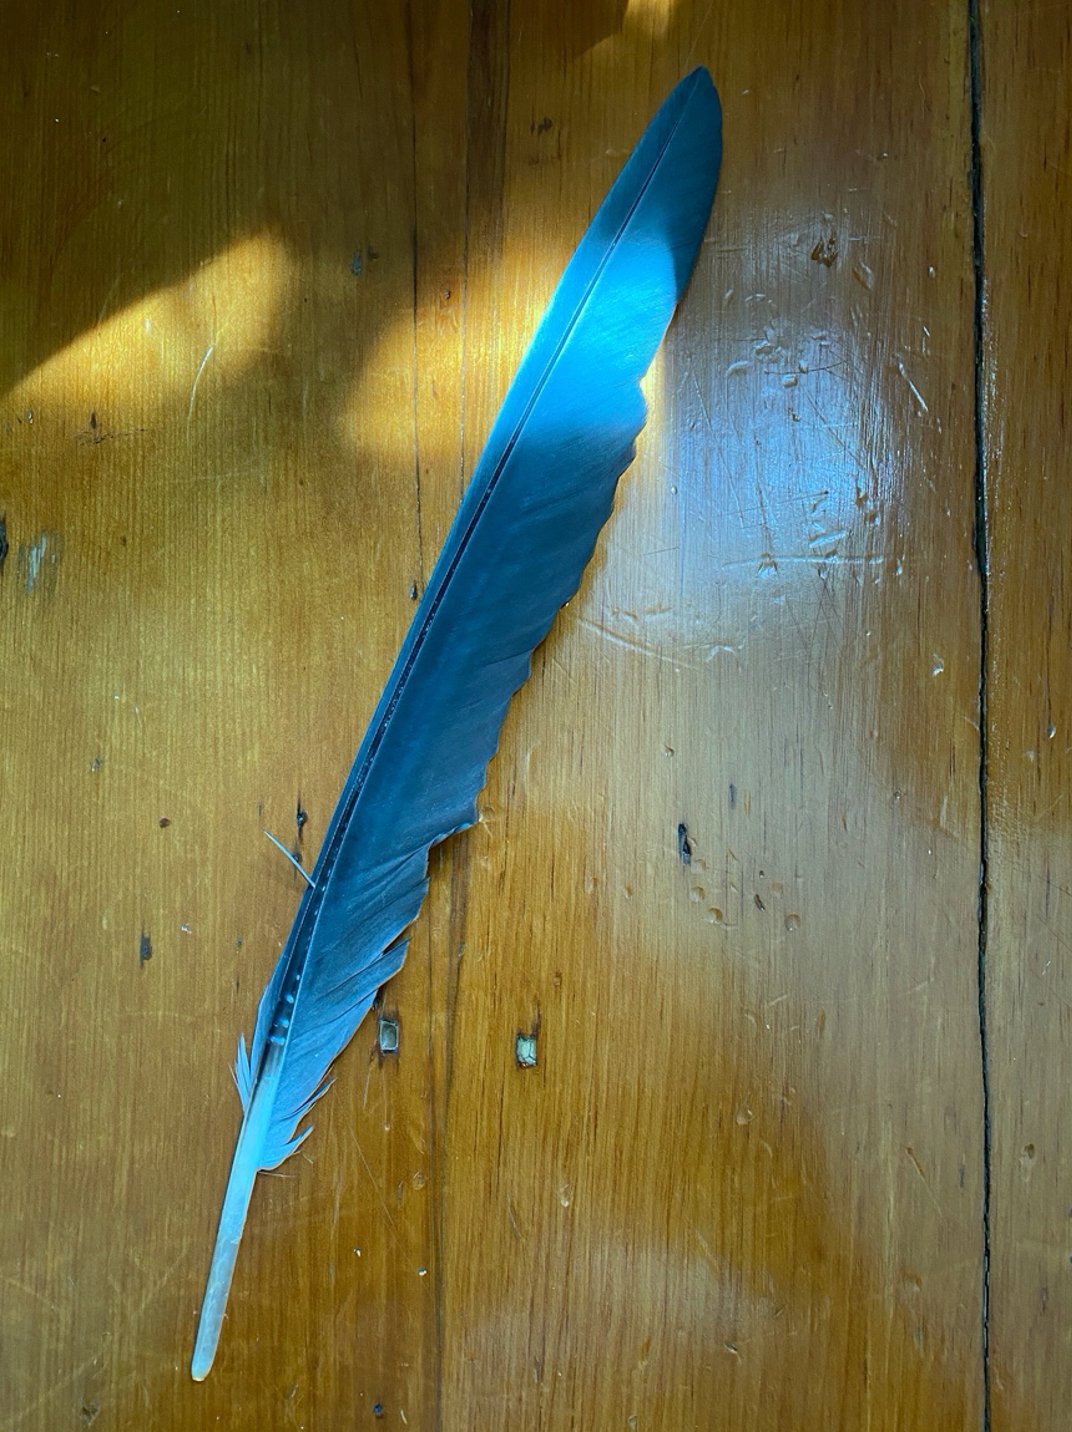 Museum-collections-including-a-blue-heron-feather.jpeg